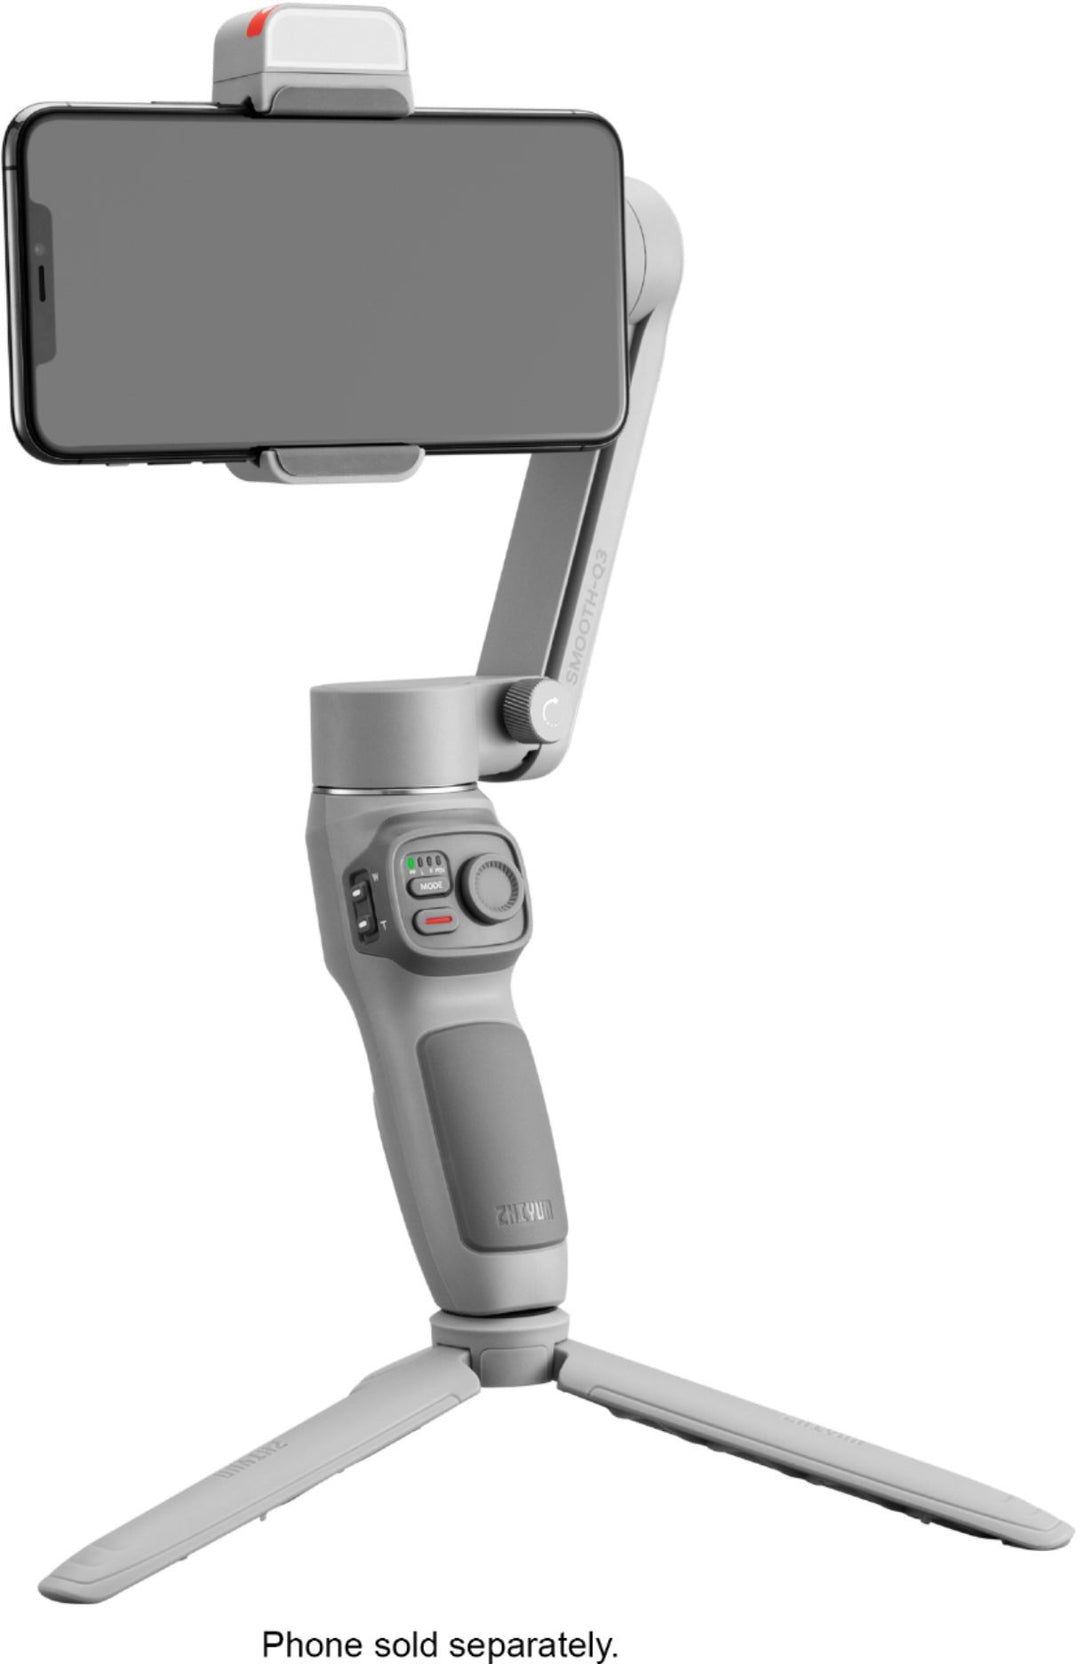 Zhiyun - Smooth Q-3 Compact Folding 3-Axis Gimbal Stabilizer for phones w/ Built-in LED Video Light with detachable tri-pod stand - Gray_22